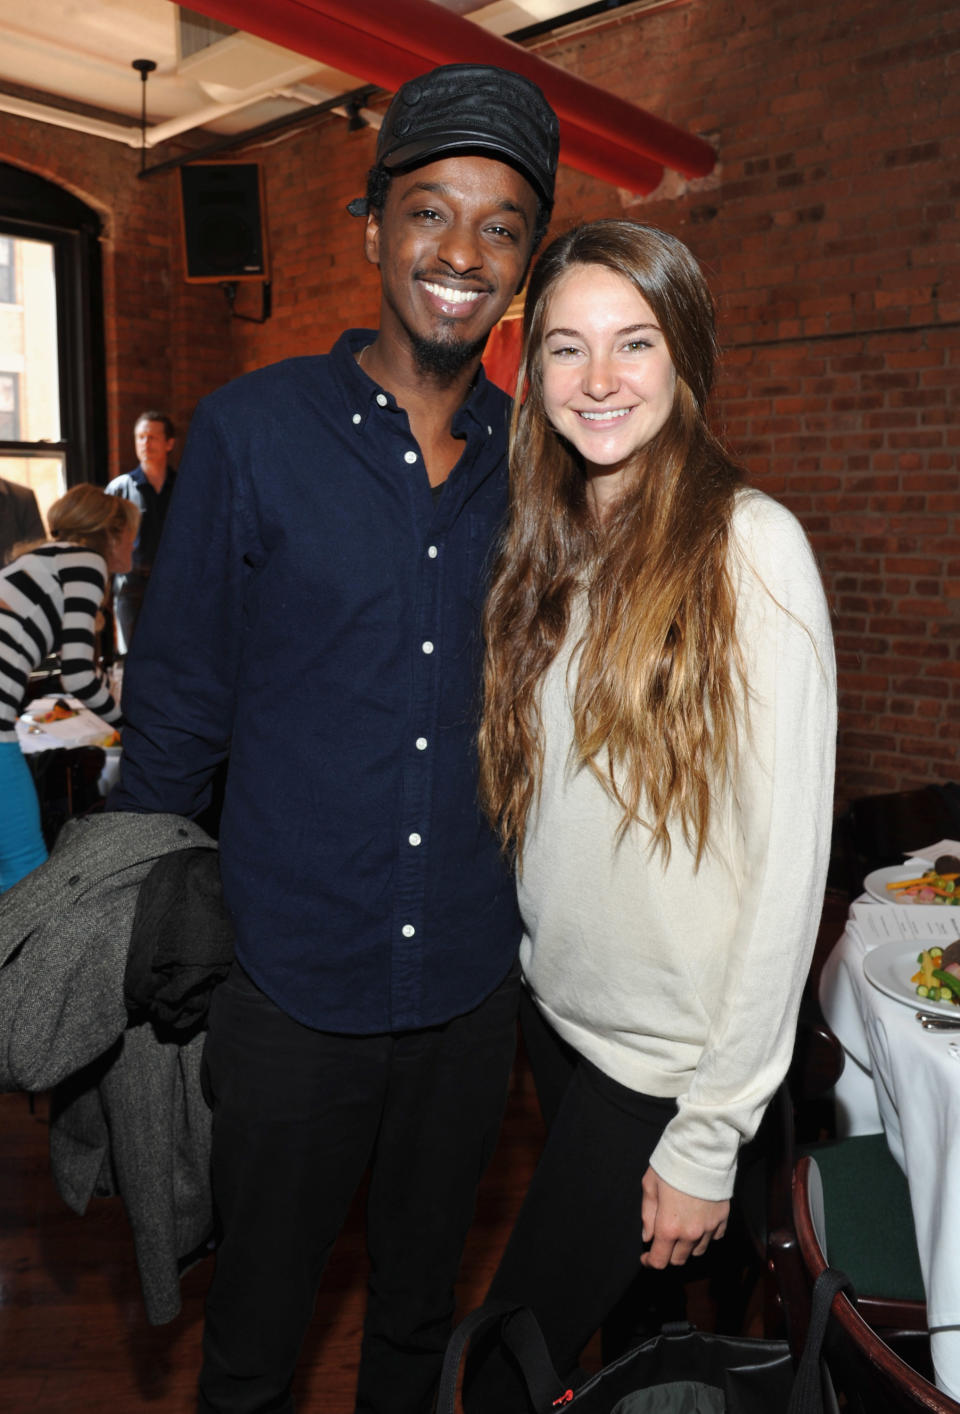 NEW YORK, NY - APRIL 19: Singer K'naan and actress Shailene Woodley attend the 2012 Tribeca Film Festival Jury lunch at the Tribeca Grill Loft on April 19, 2012 in New York City. (Photo by Mike Coppola/Getty Images for Tribeca Film Festival)